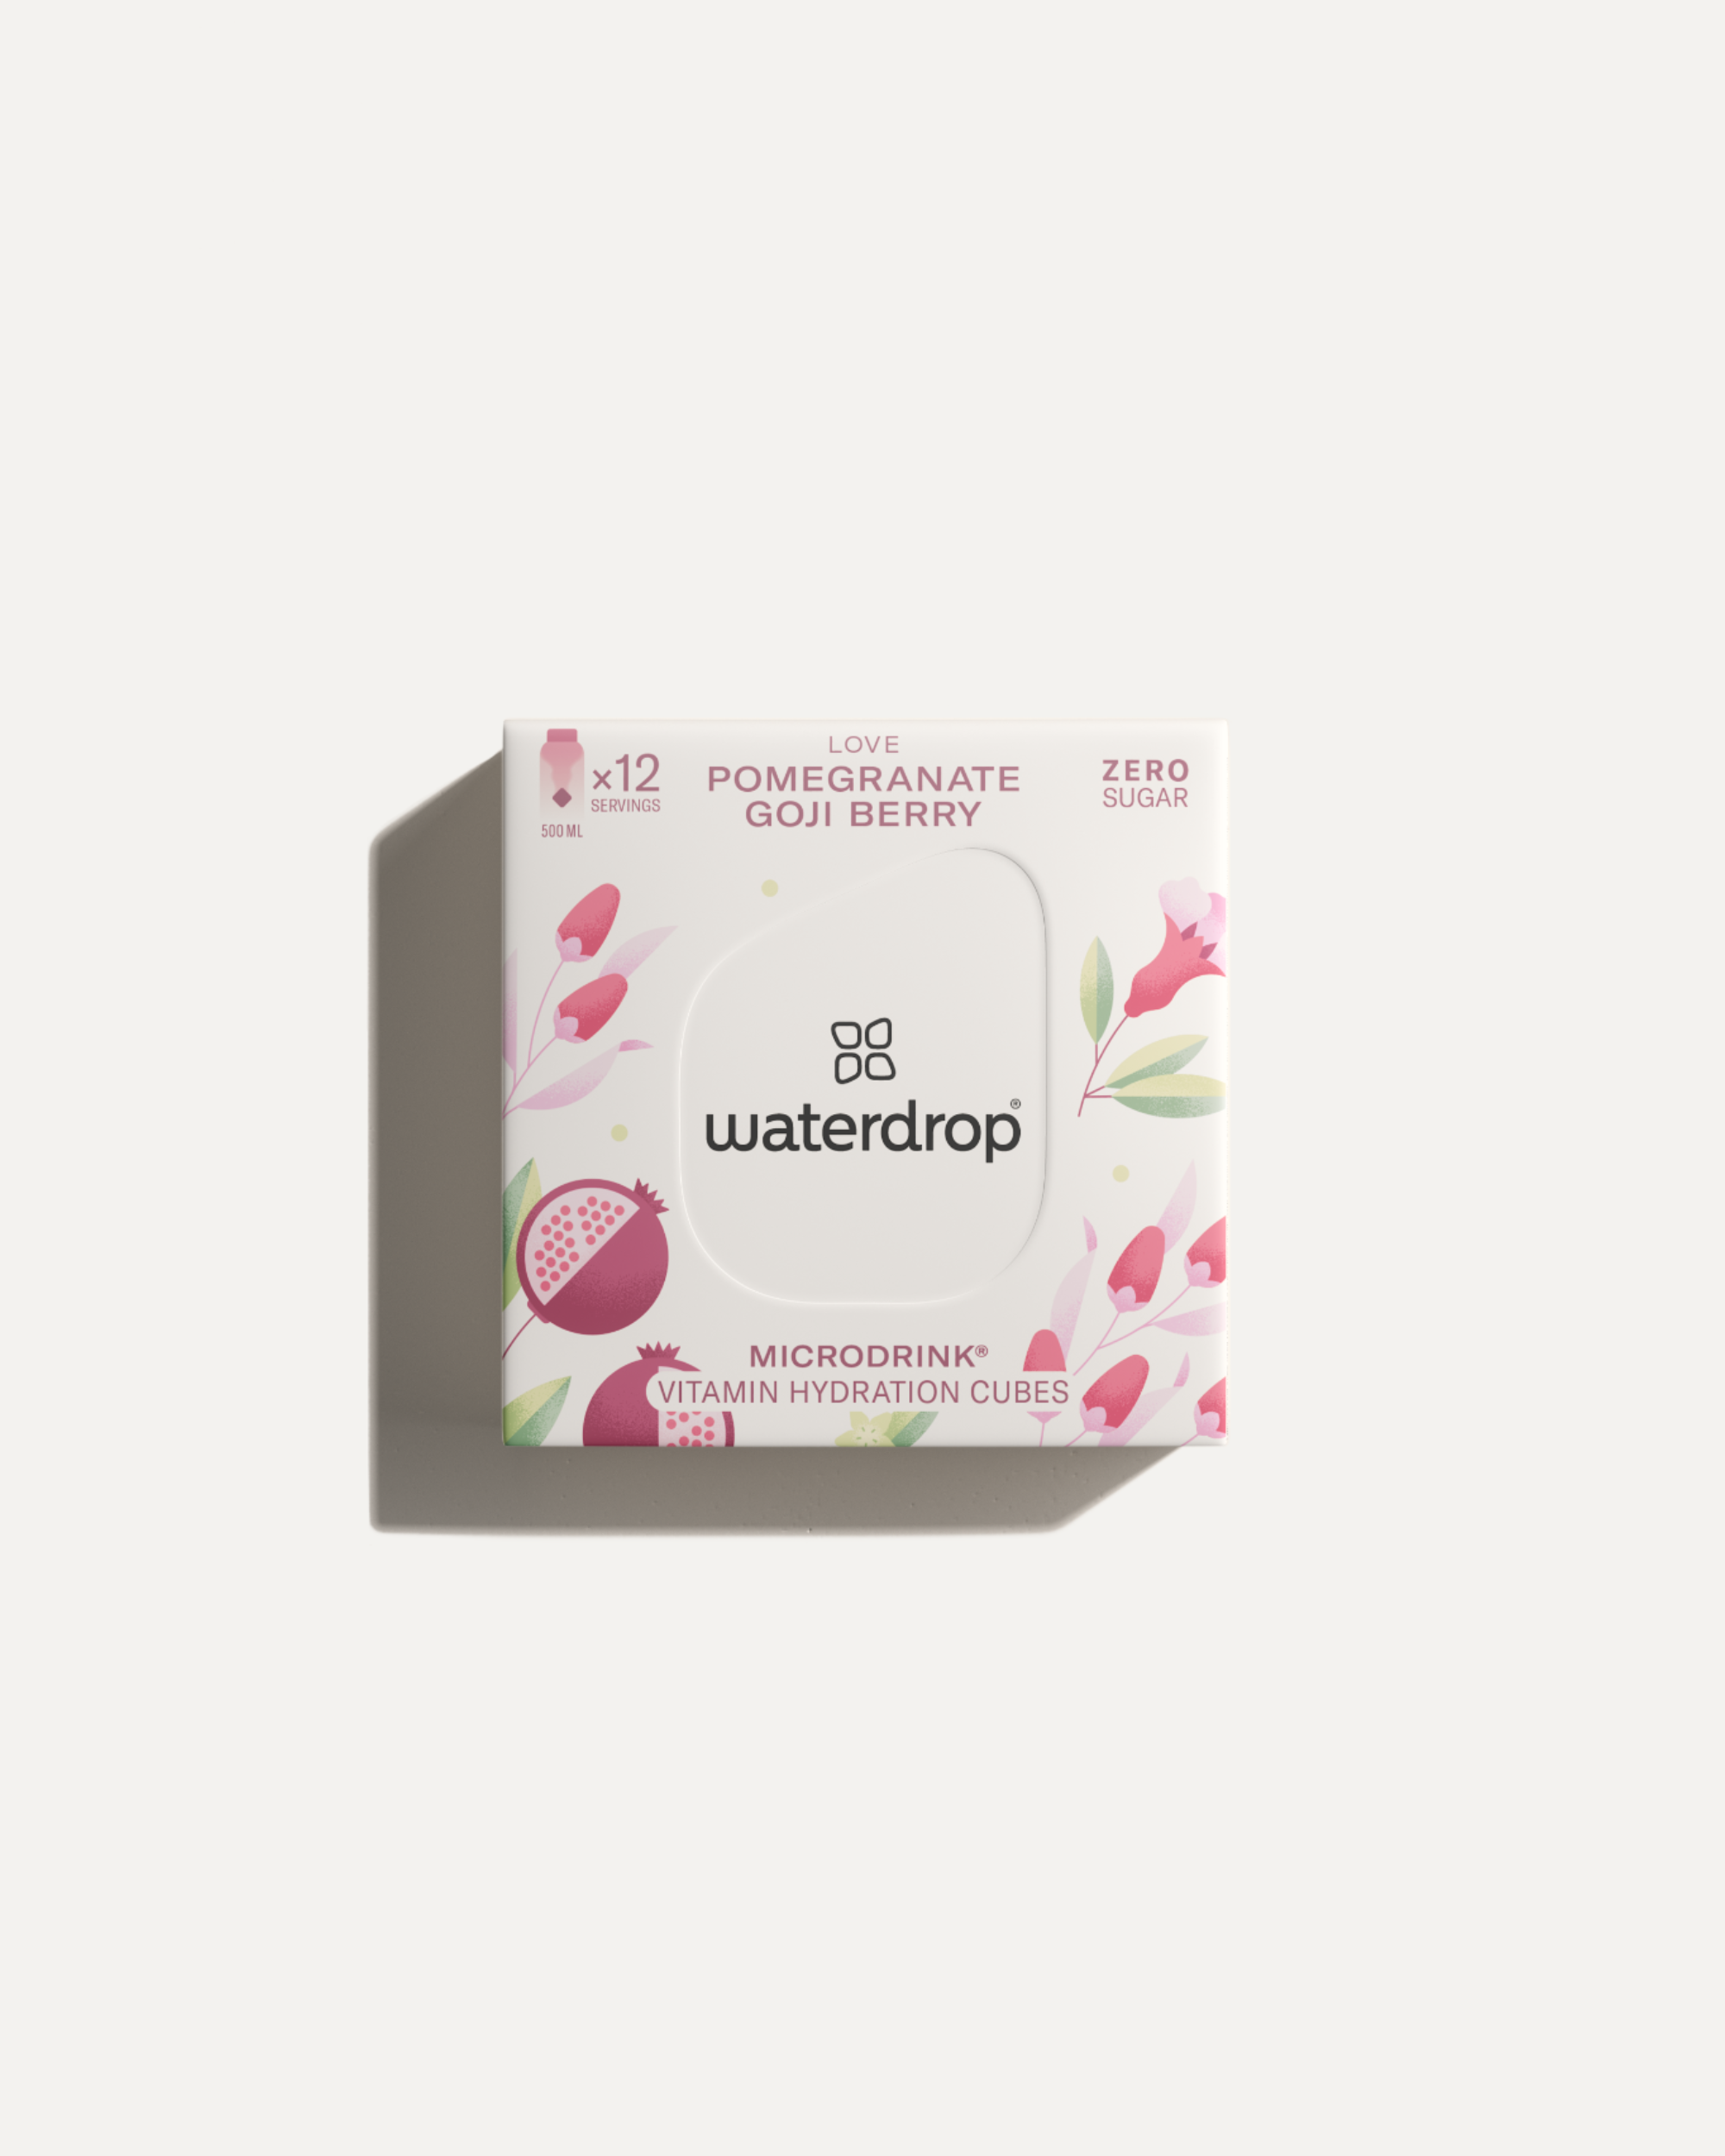 Waterdrop Microdrink Youth Pêche Gingembre 3 portions